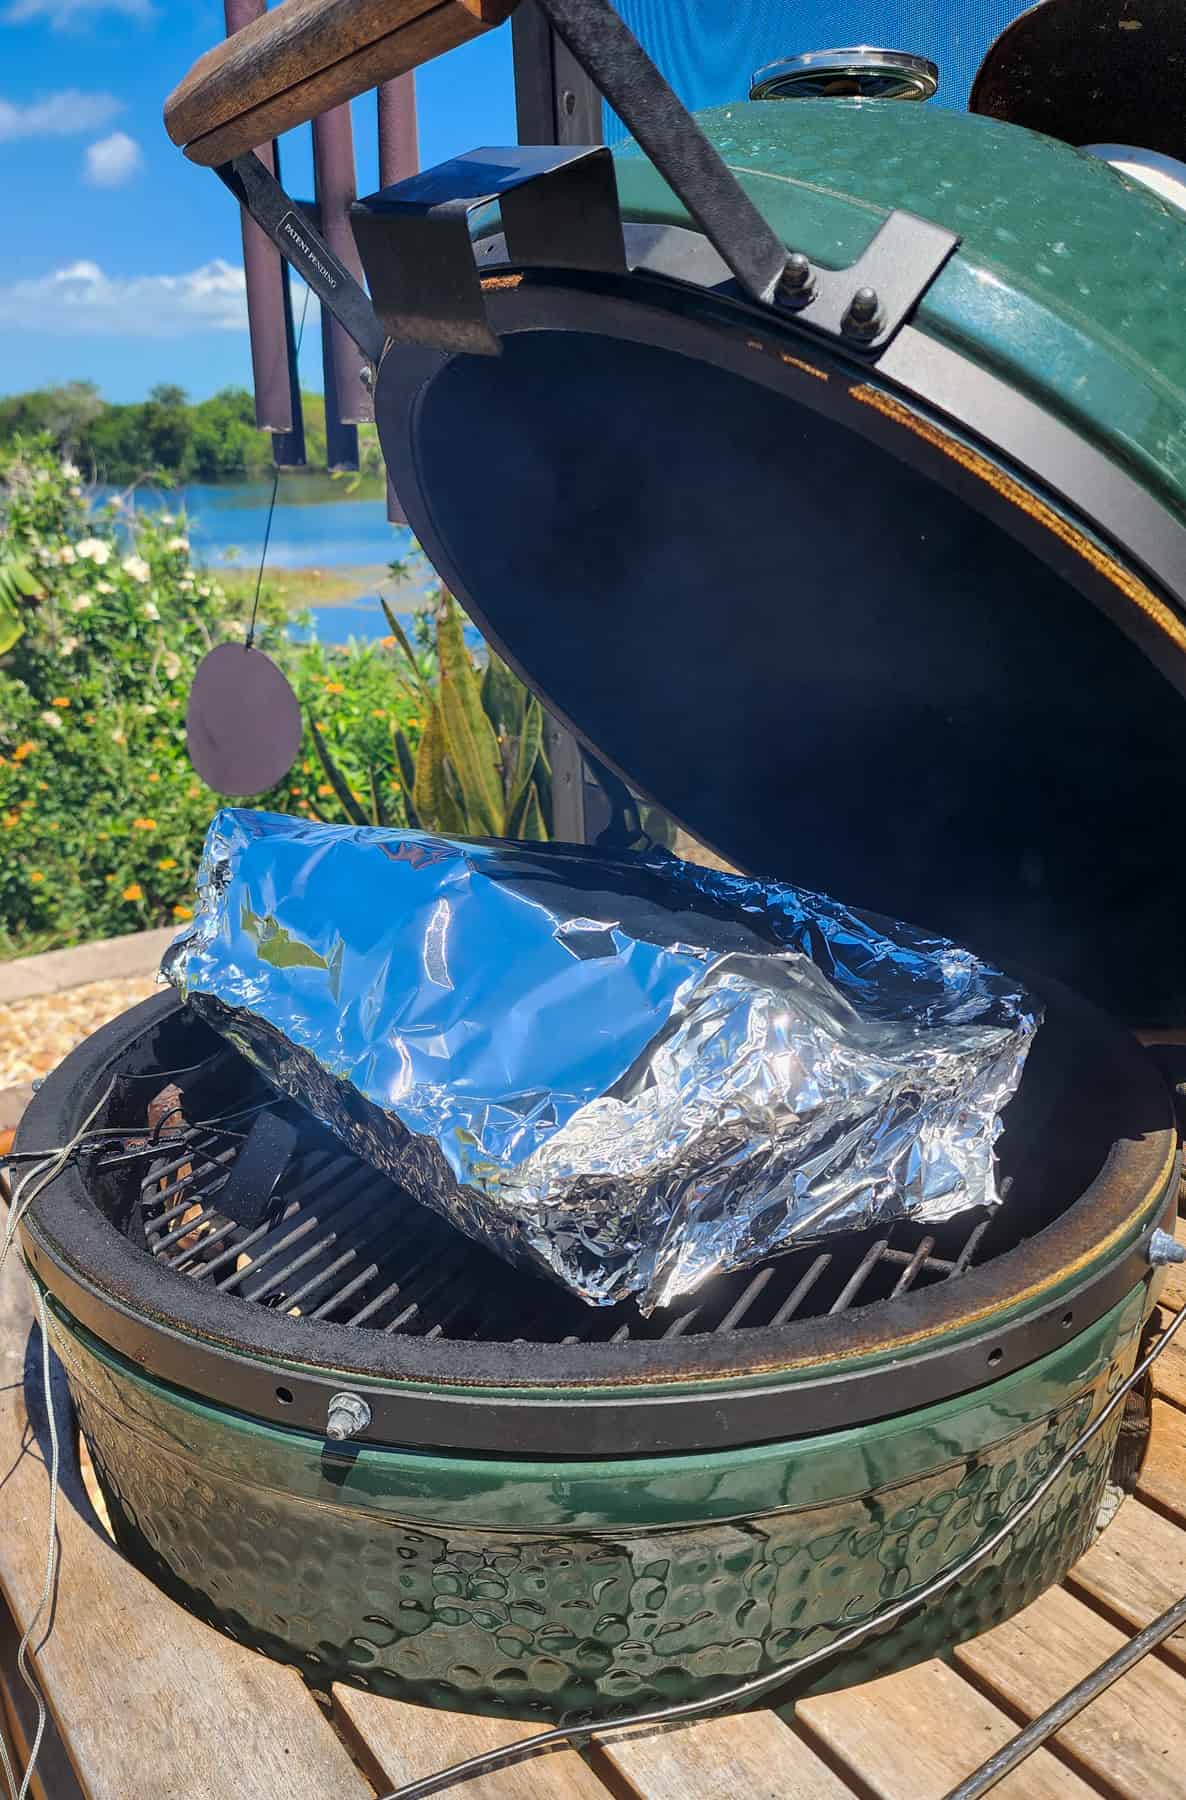 pan wrapped in foil on grill grate in Big Green Egg